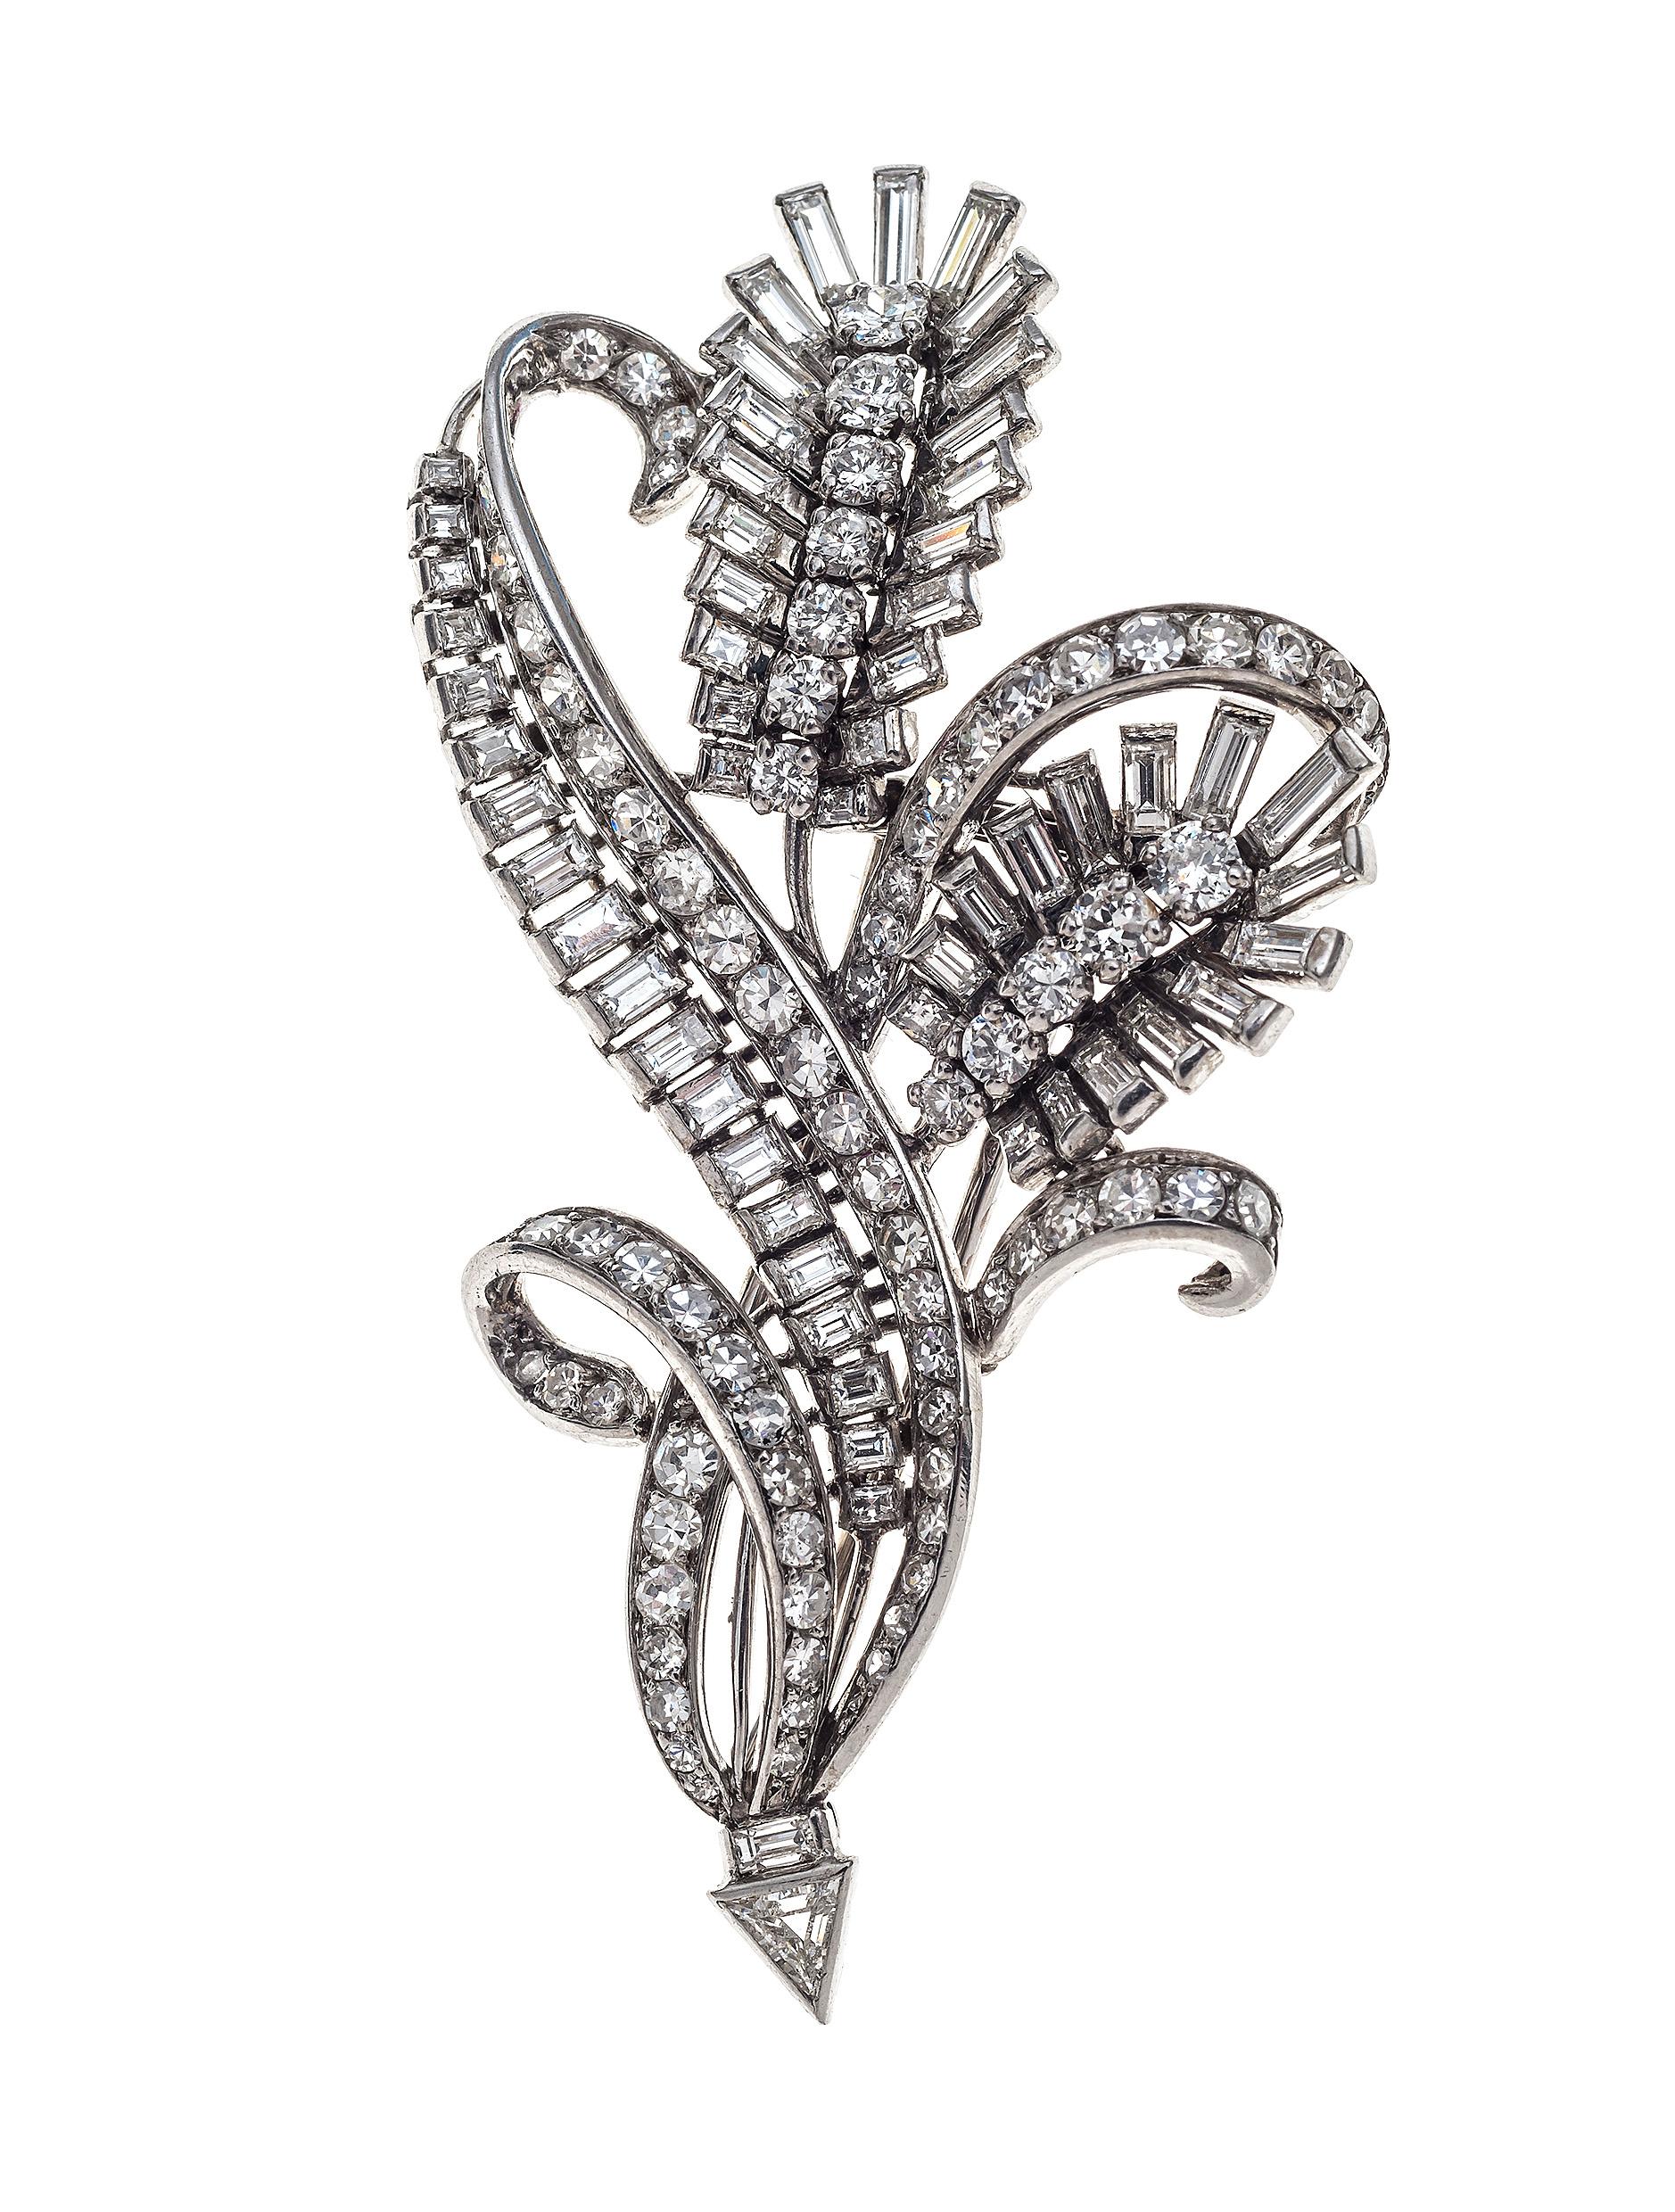 The dress clip consists of two flowers and stylised leaves set with fifty-five baguette cut diamonds, one triangular diamond, and sixty round diamonds set in platinum. Each clip has thirty-one baguettes and twenty-seven round diamonds in brilliant